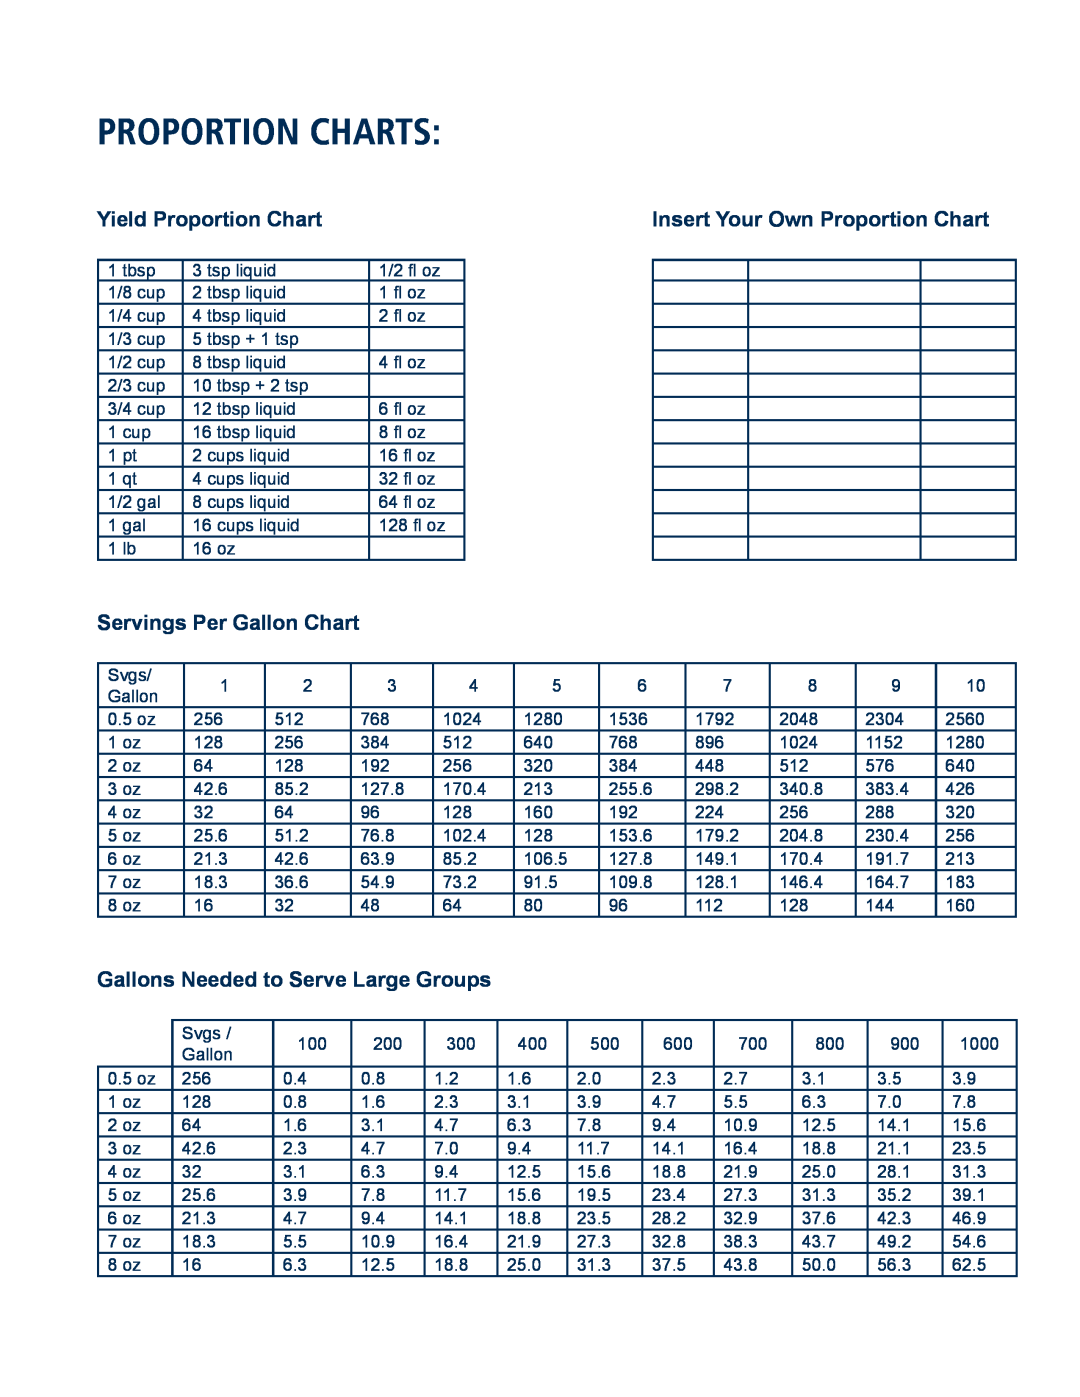 Unified Brands Braising Pan manual Proportion Charts, Yield Proportion Chart, Insert Your Own Proportion Chart 